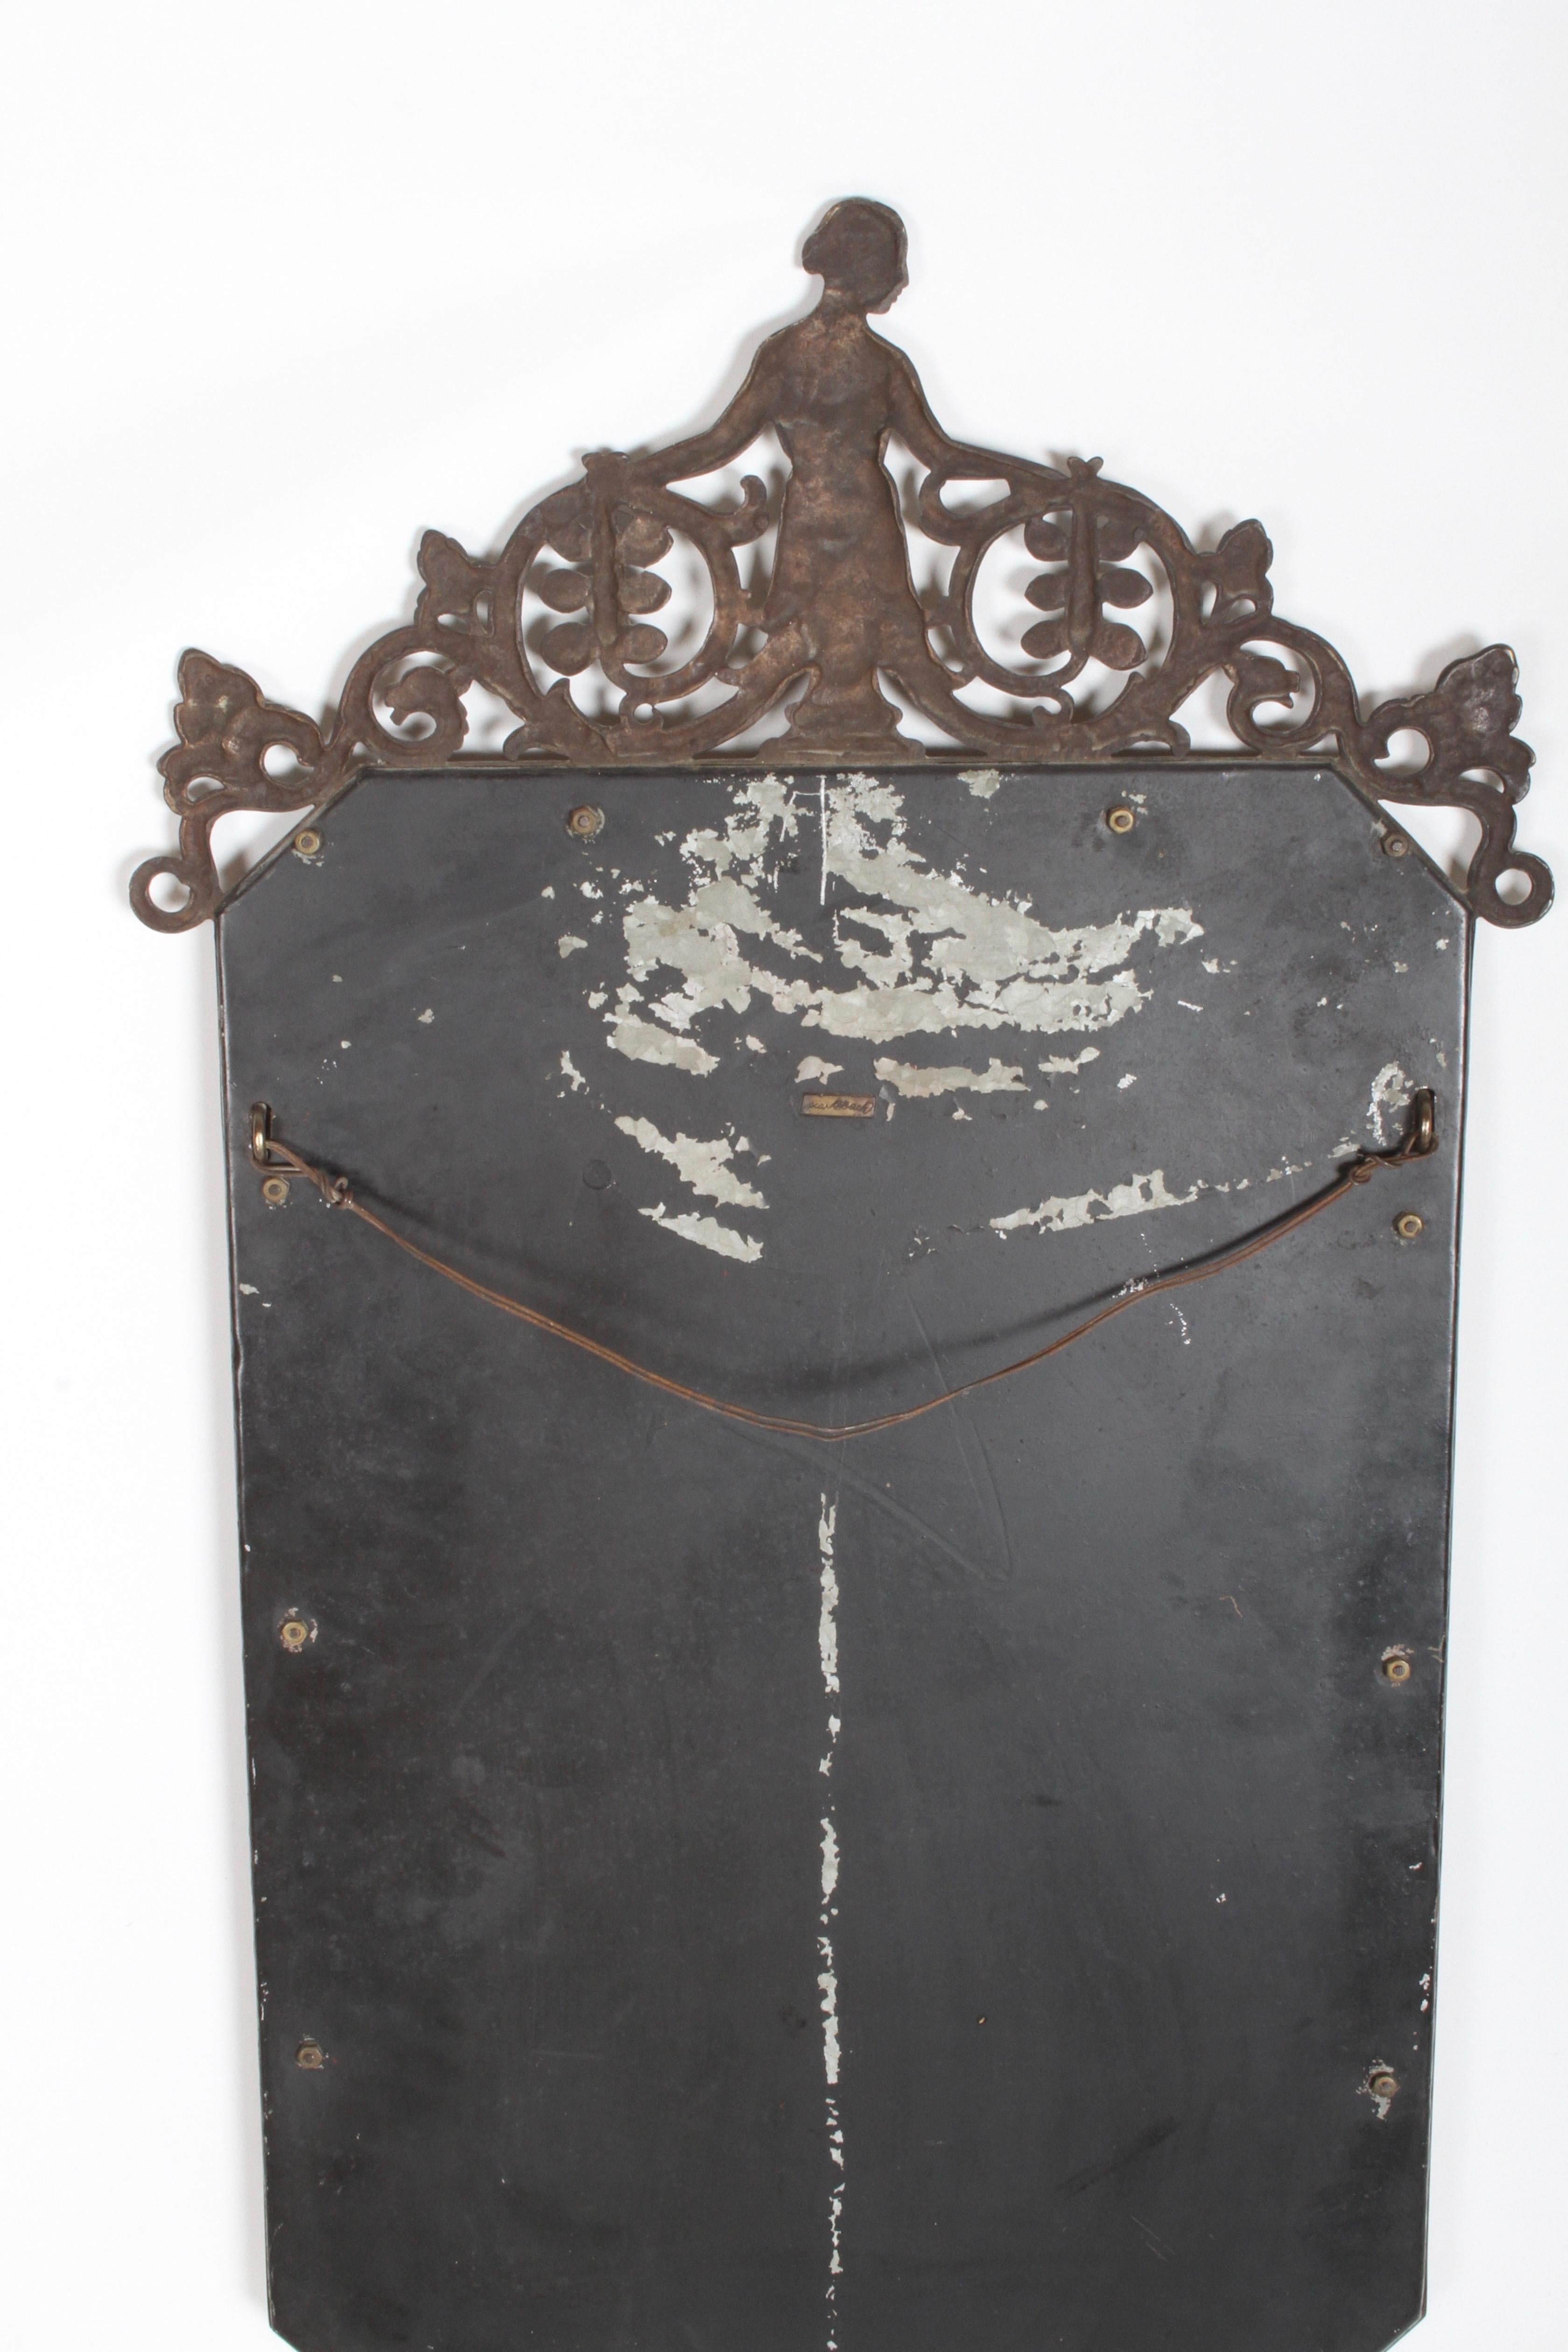 Stunning bronze Oscar Bach wall mirror with female nude, ornate scroll details, plus a steer skull, signed on back, circa 1920s, art Nouveau or Arts & Crafts style. Mirror is 15.25